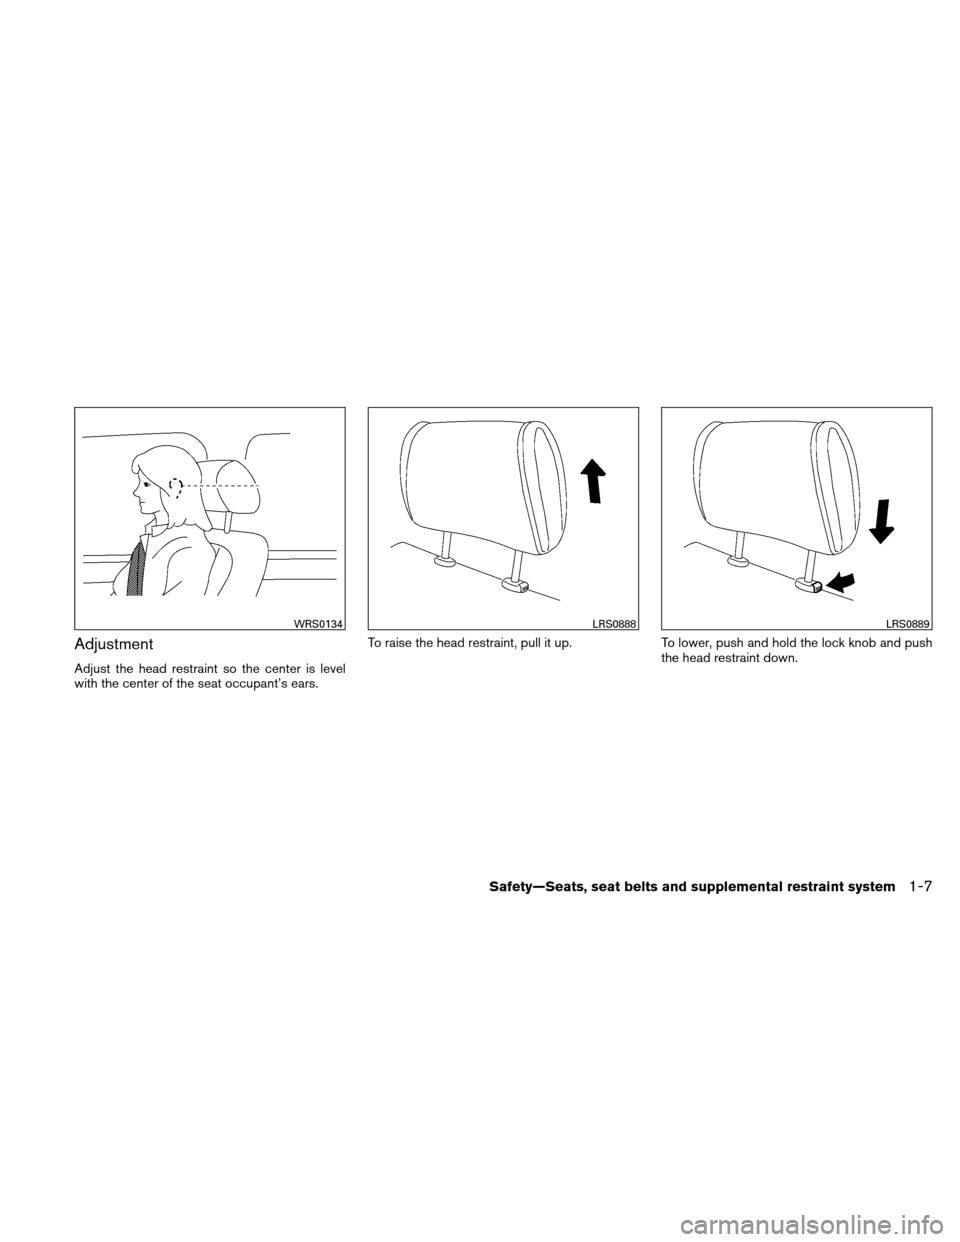 NISSAN ALTIMA HYBRID 2010 L32A / 4.G Owners Manual Adjustment
Adjust the head restraint so the center is level
with the center of the seat occupant’s ears.To raise the head restraint, pull it up.
To lower, push and hold the lock knob and push
the he